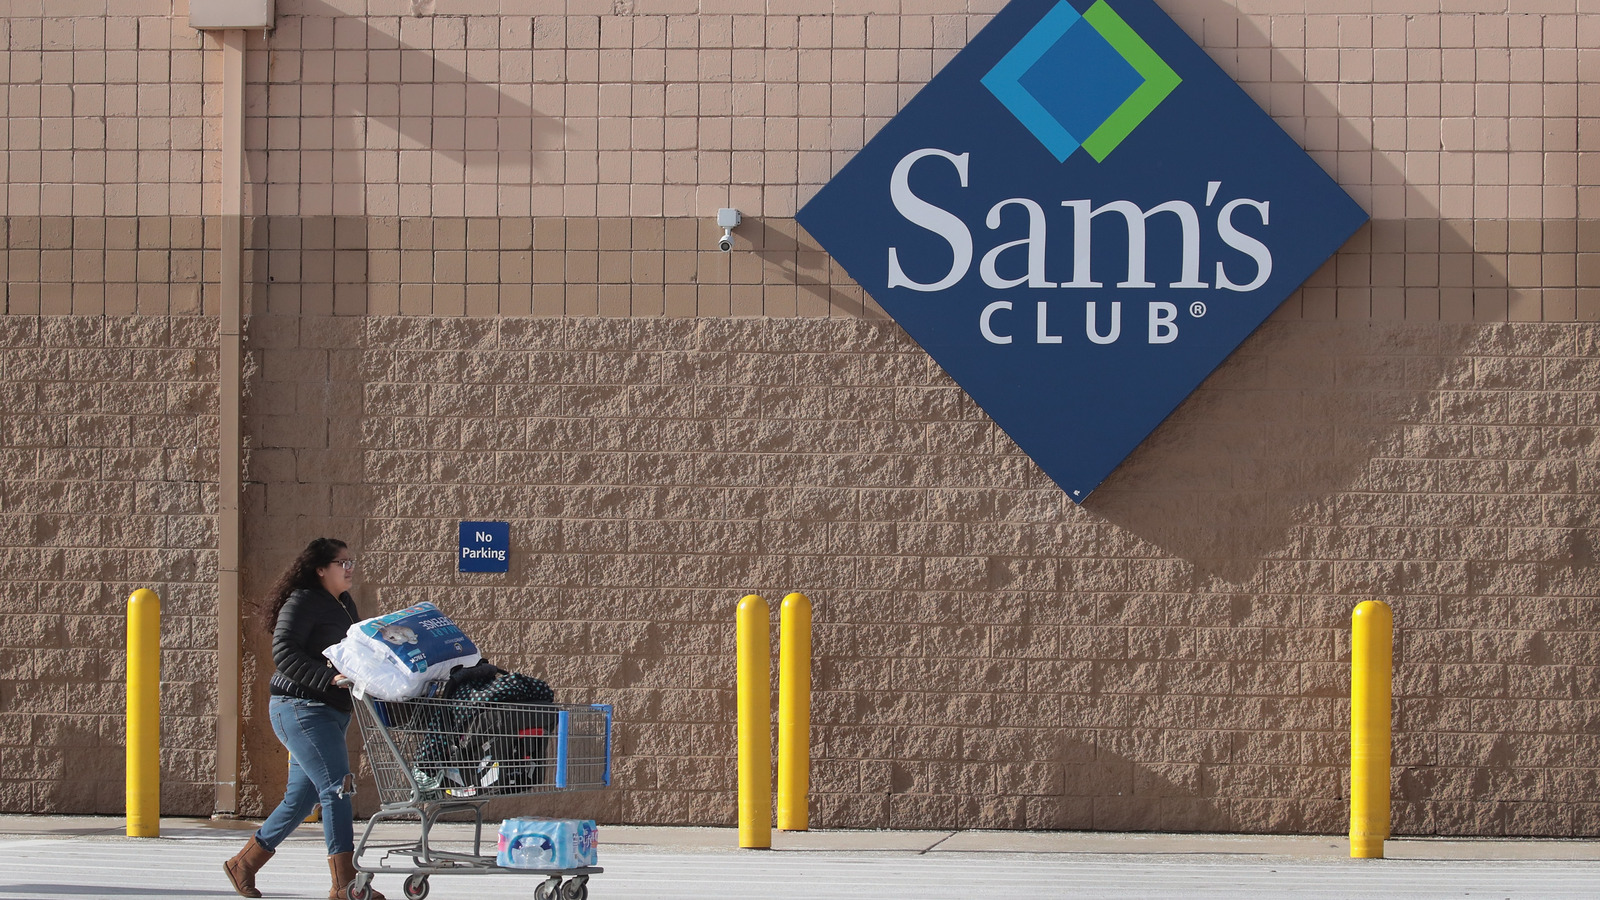 Read This Before Buying Sam's Club Member's Mark Products